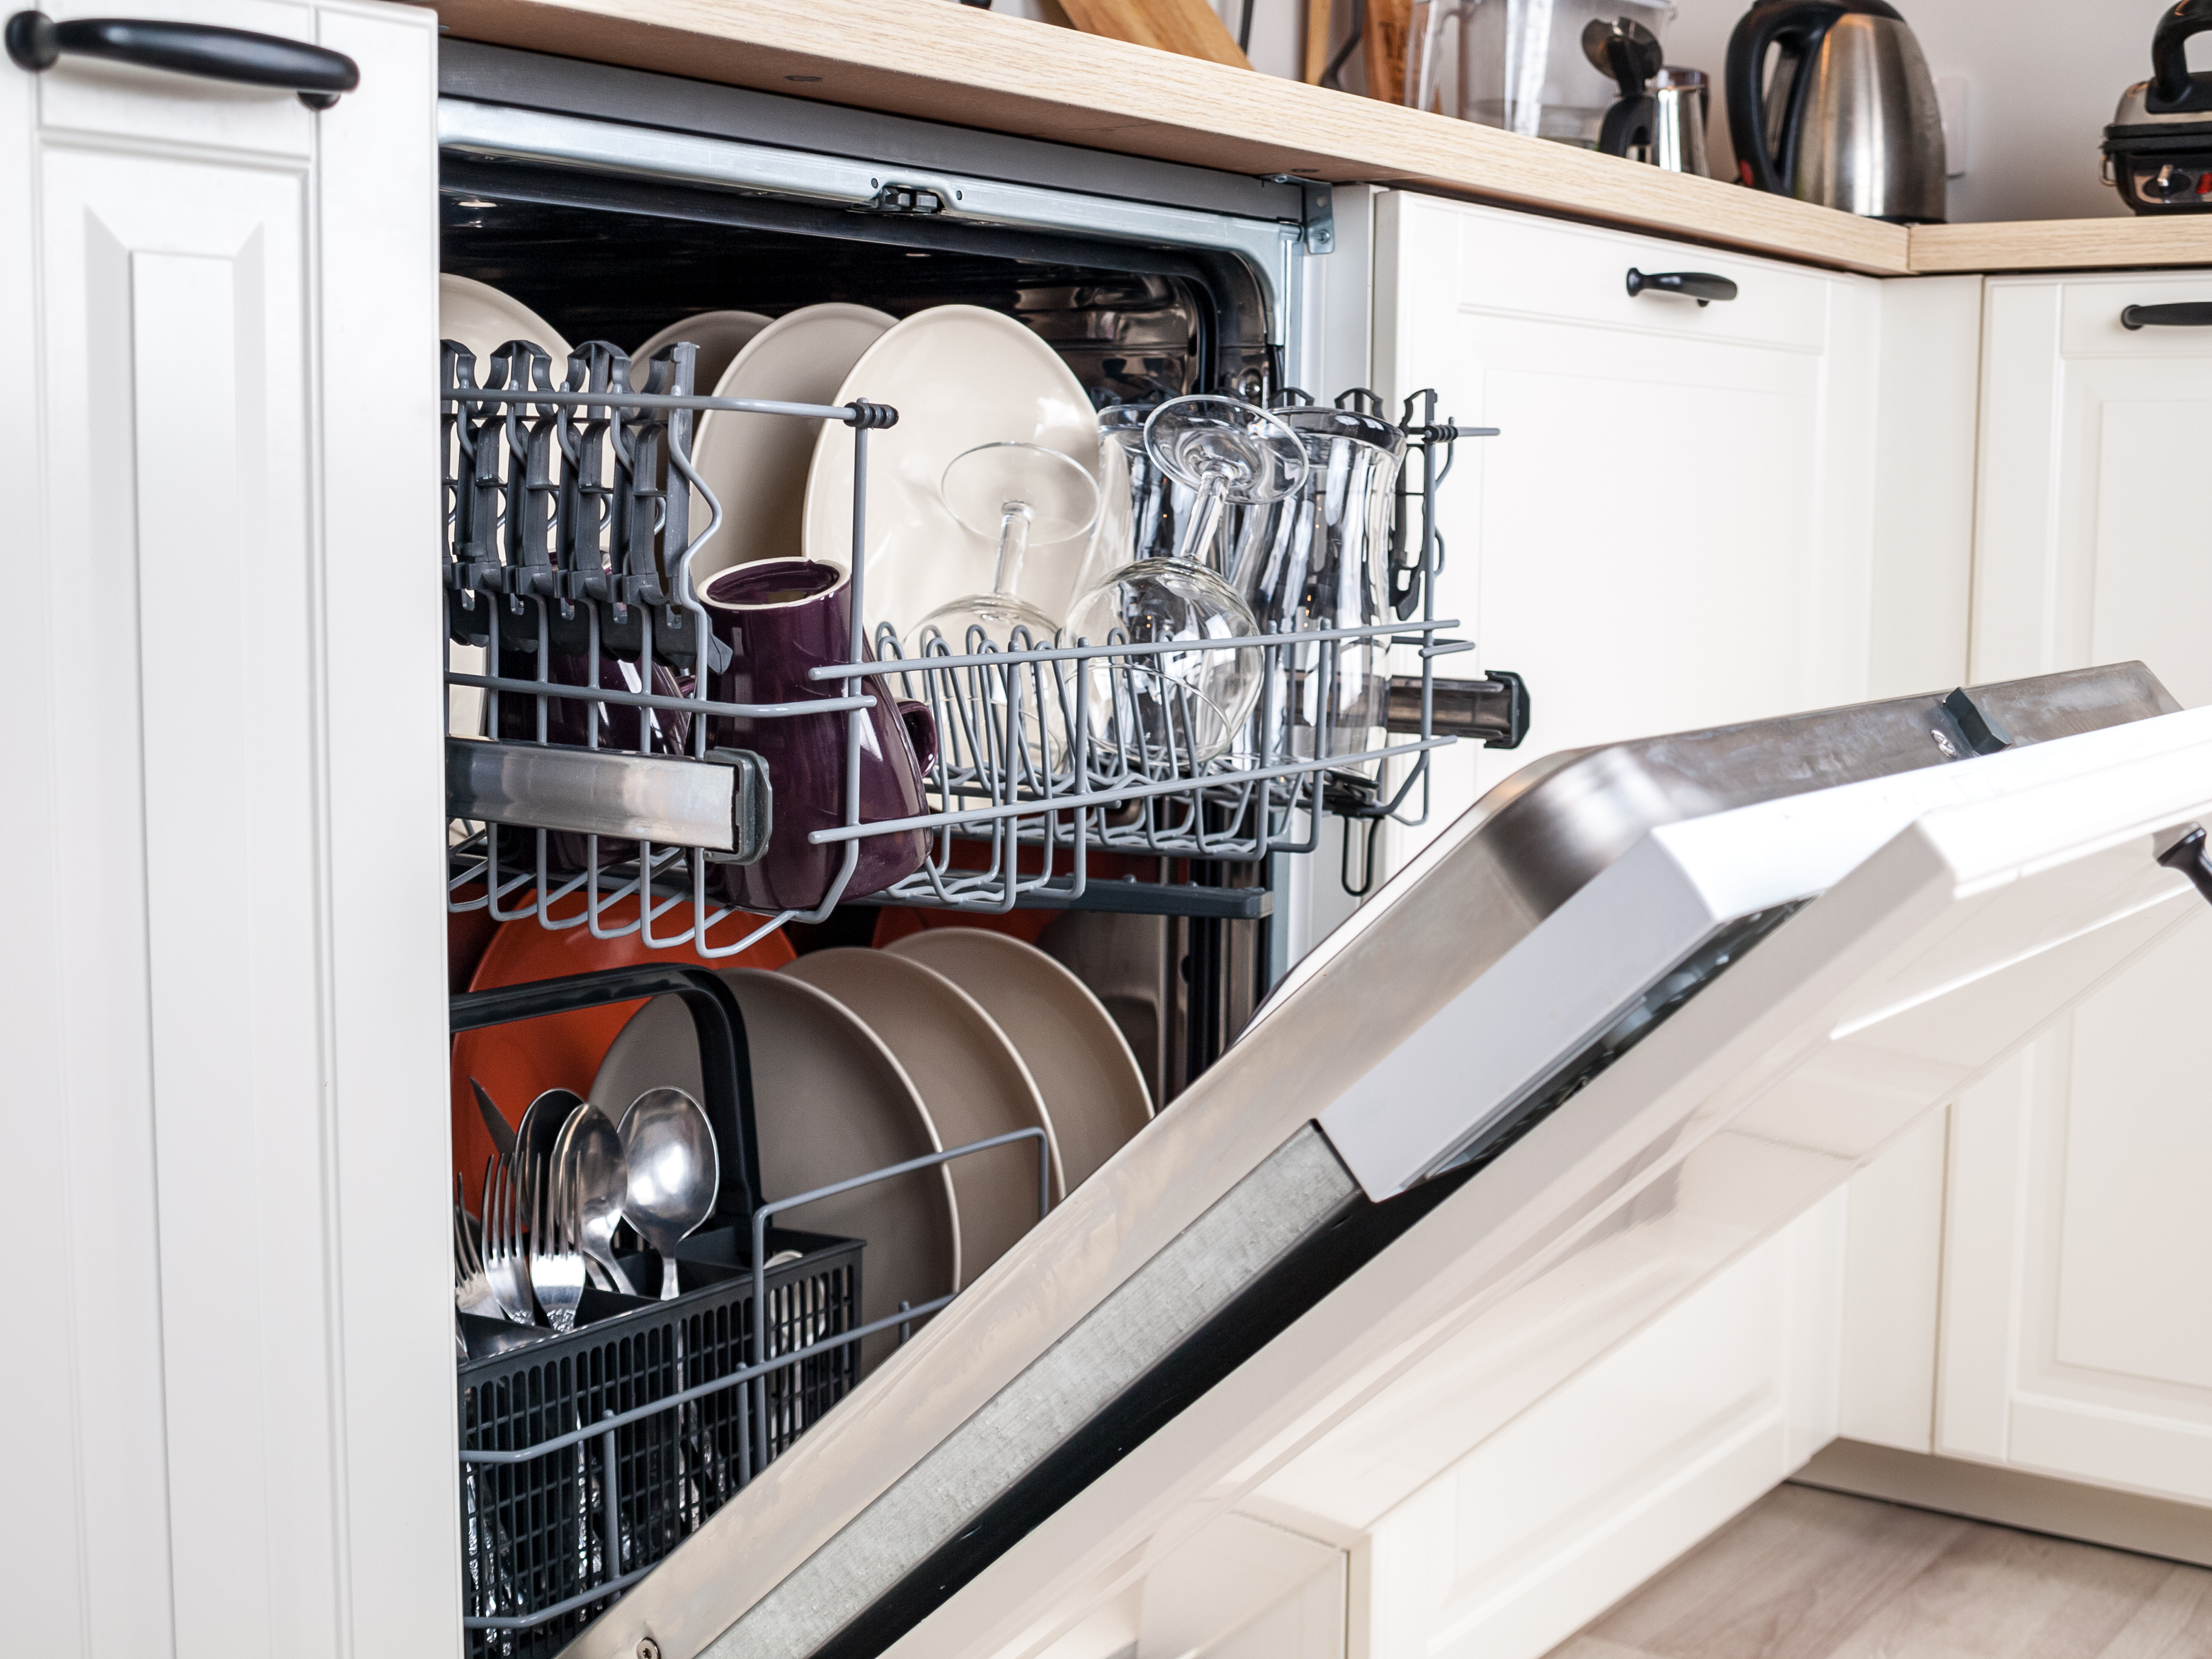 How to Put the Top Rack of a Dishwasher Back on Track